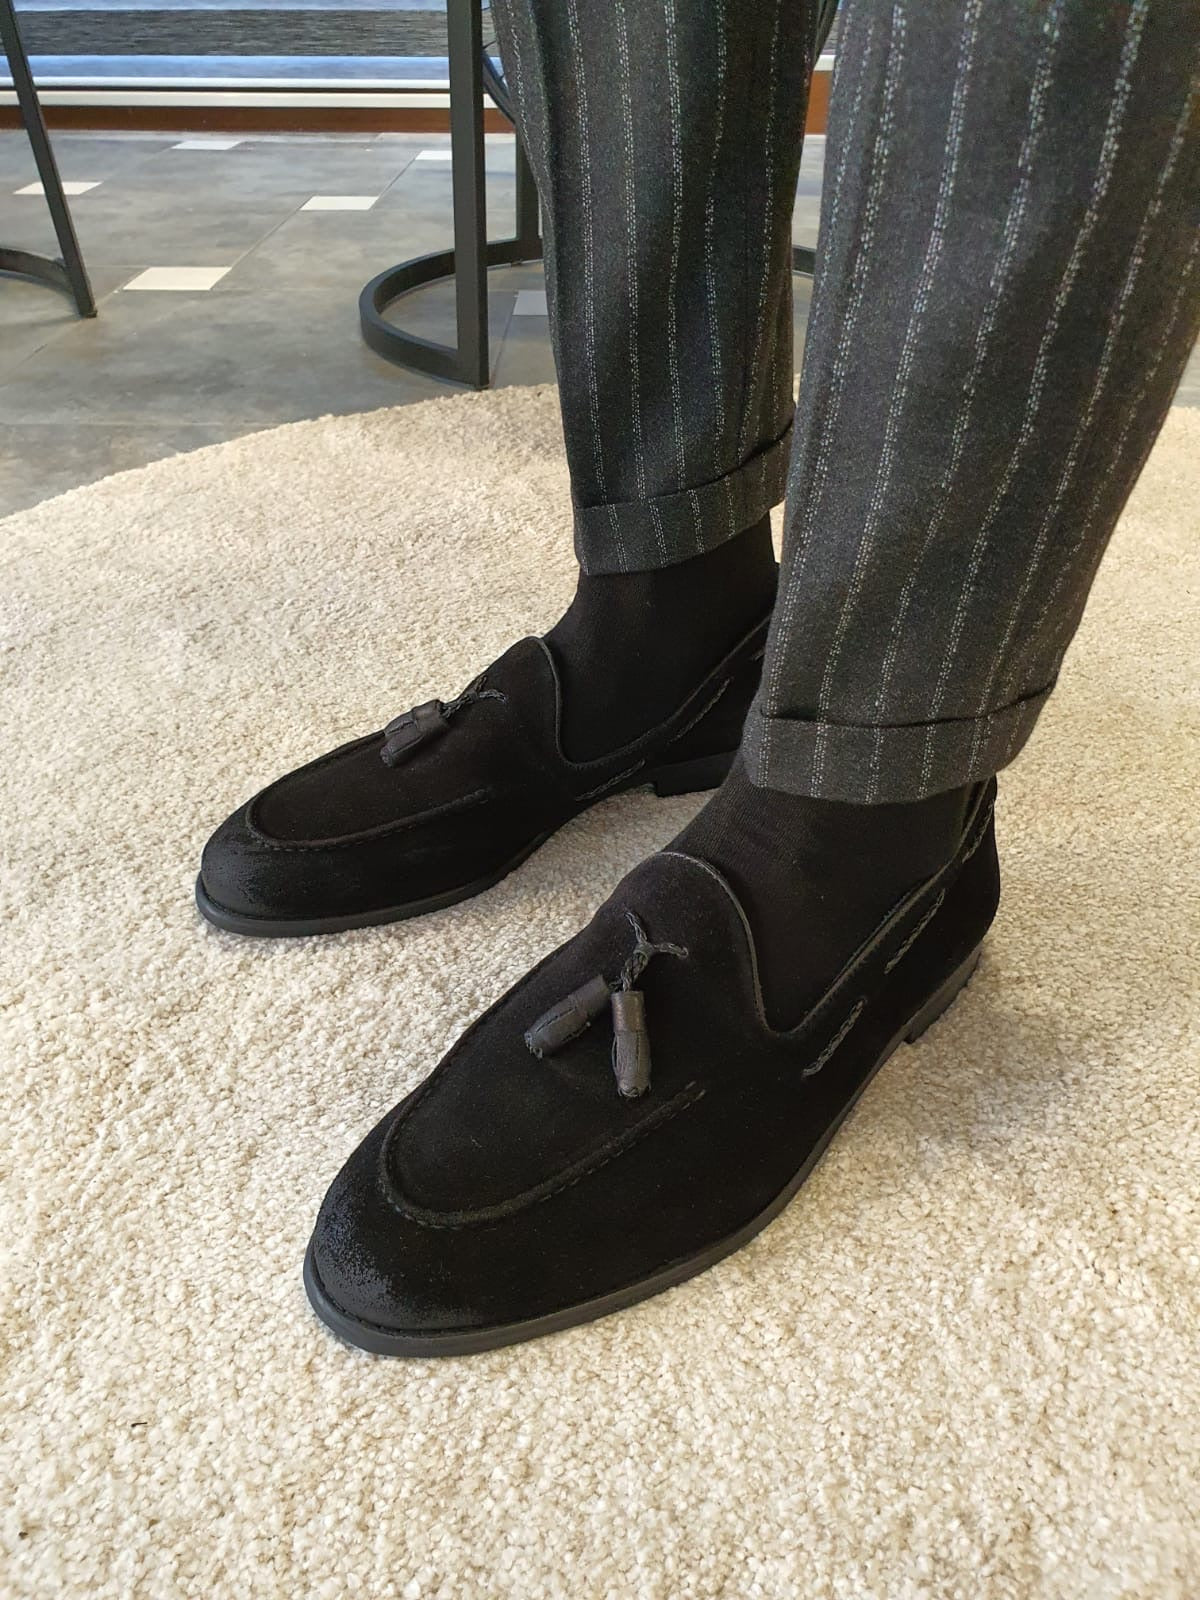 BLACK SUEDE SPECIAL EDITION* WITH TASSEL DETAIL LOAFER